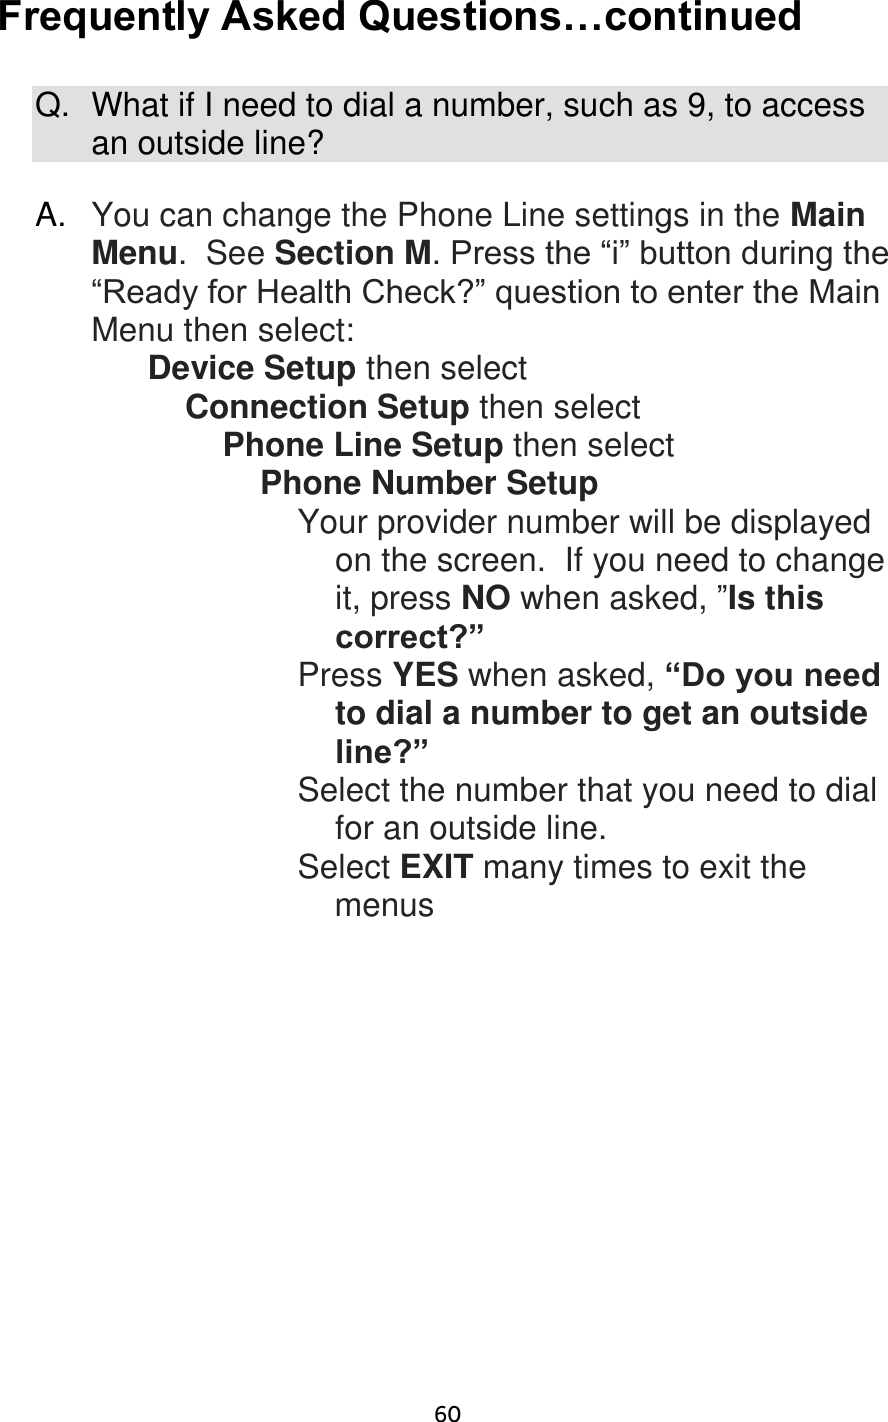                      60 Frequently Asked Questions…continued  Q.  What if I need to dial a number, such as 9, to access an outside line?  A. You can change the Phone Line settings in the Main Menu.  See Section M. Press the “i” button during the “Ready for Health Check?” question to enter the Main Menu then select: Device Setup then select Connection Setup then select Phone Line Setup then select Phone Number Setup  Your provider number will be displayed on the screen.  If you need to change it, press NO when asked, ”Is this correct?” Press YES when asked, “Do you need to dial a number to get an outside line?” Select the number that you need to dial for an outside line. Select EXIT many times to exit the          menus     